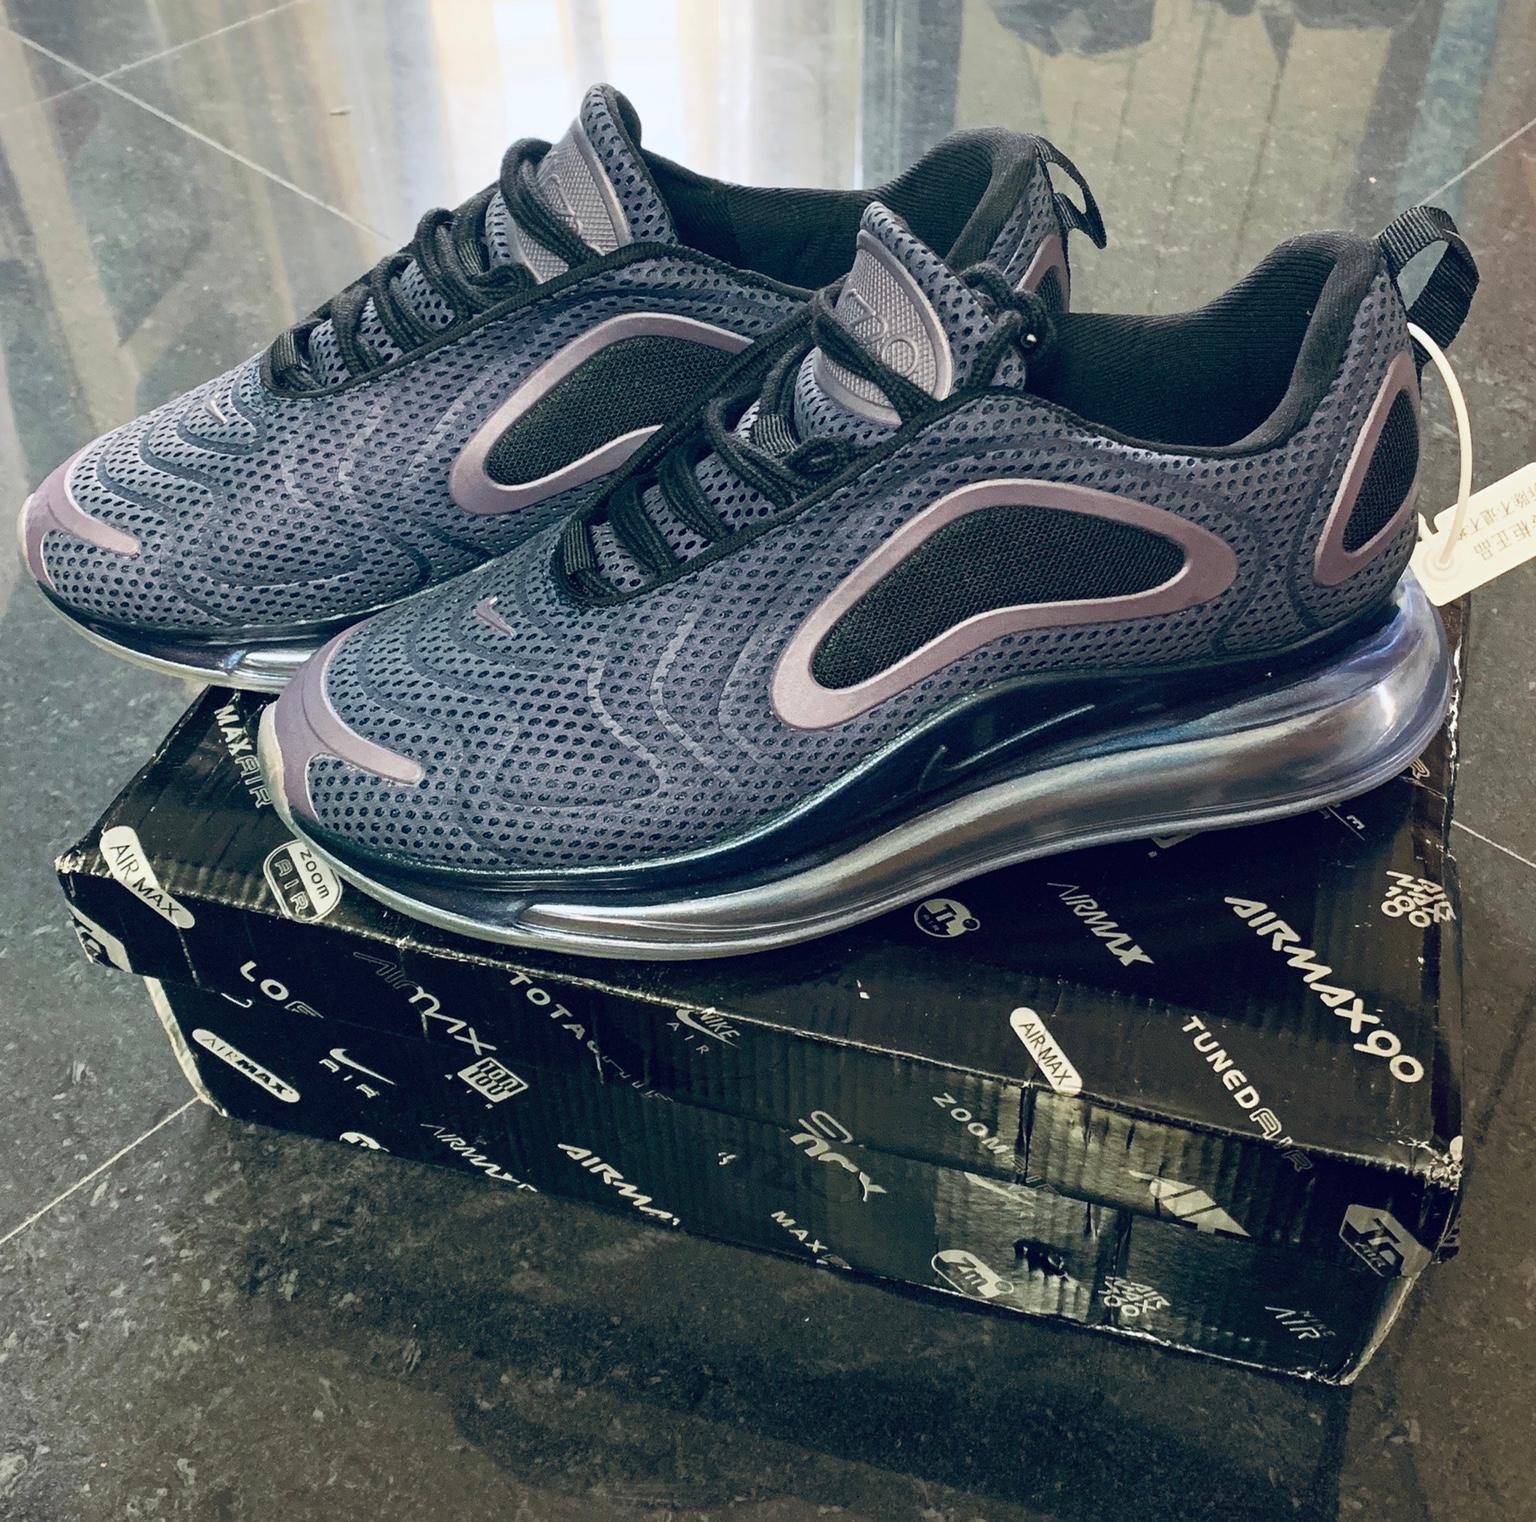 Nike Air Max 720 Limited Nuove 41 in 20136 Milano for €140.00 for sale |  Shpock